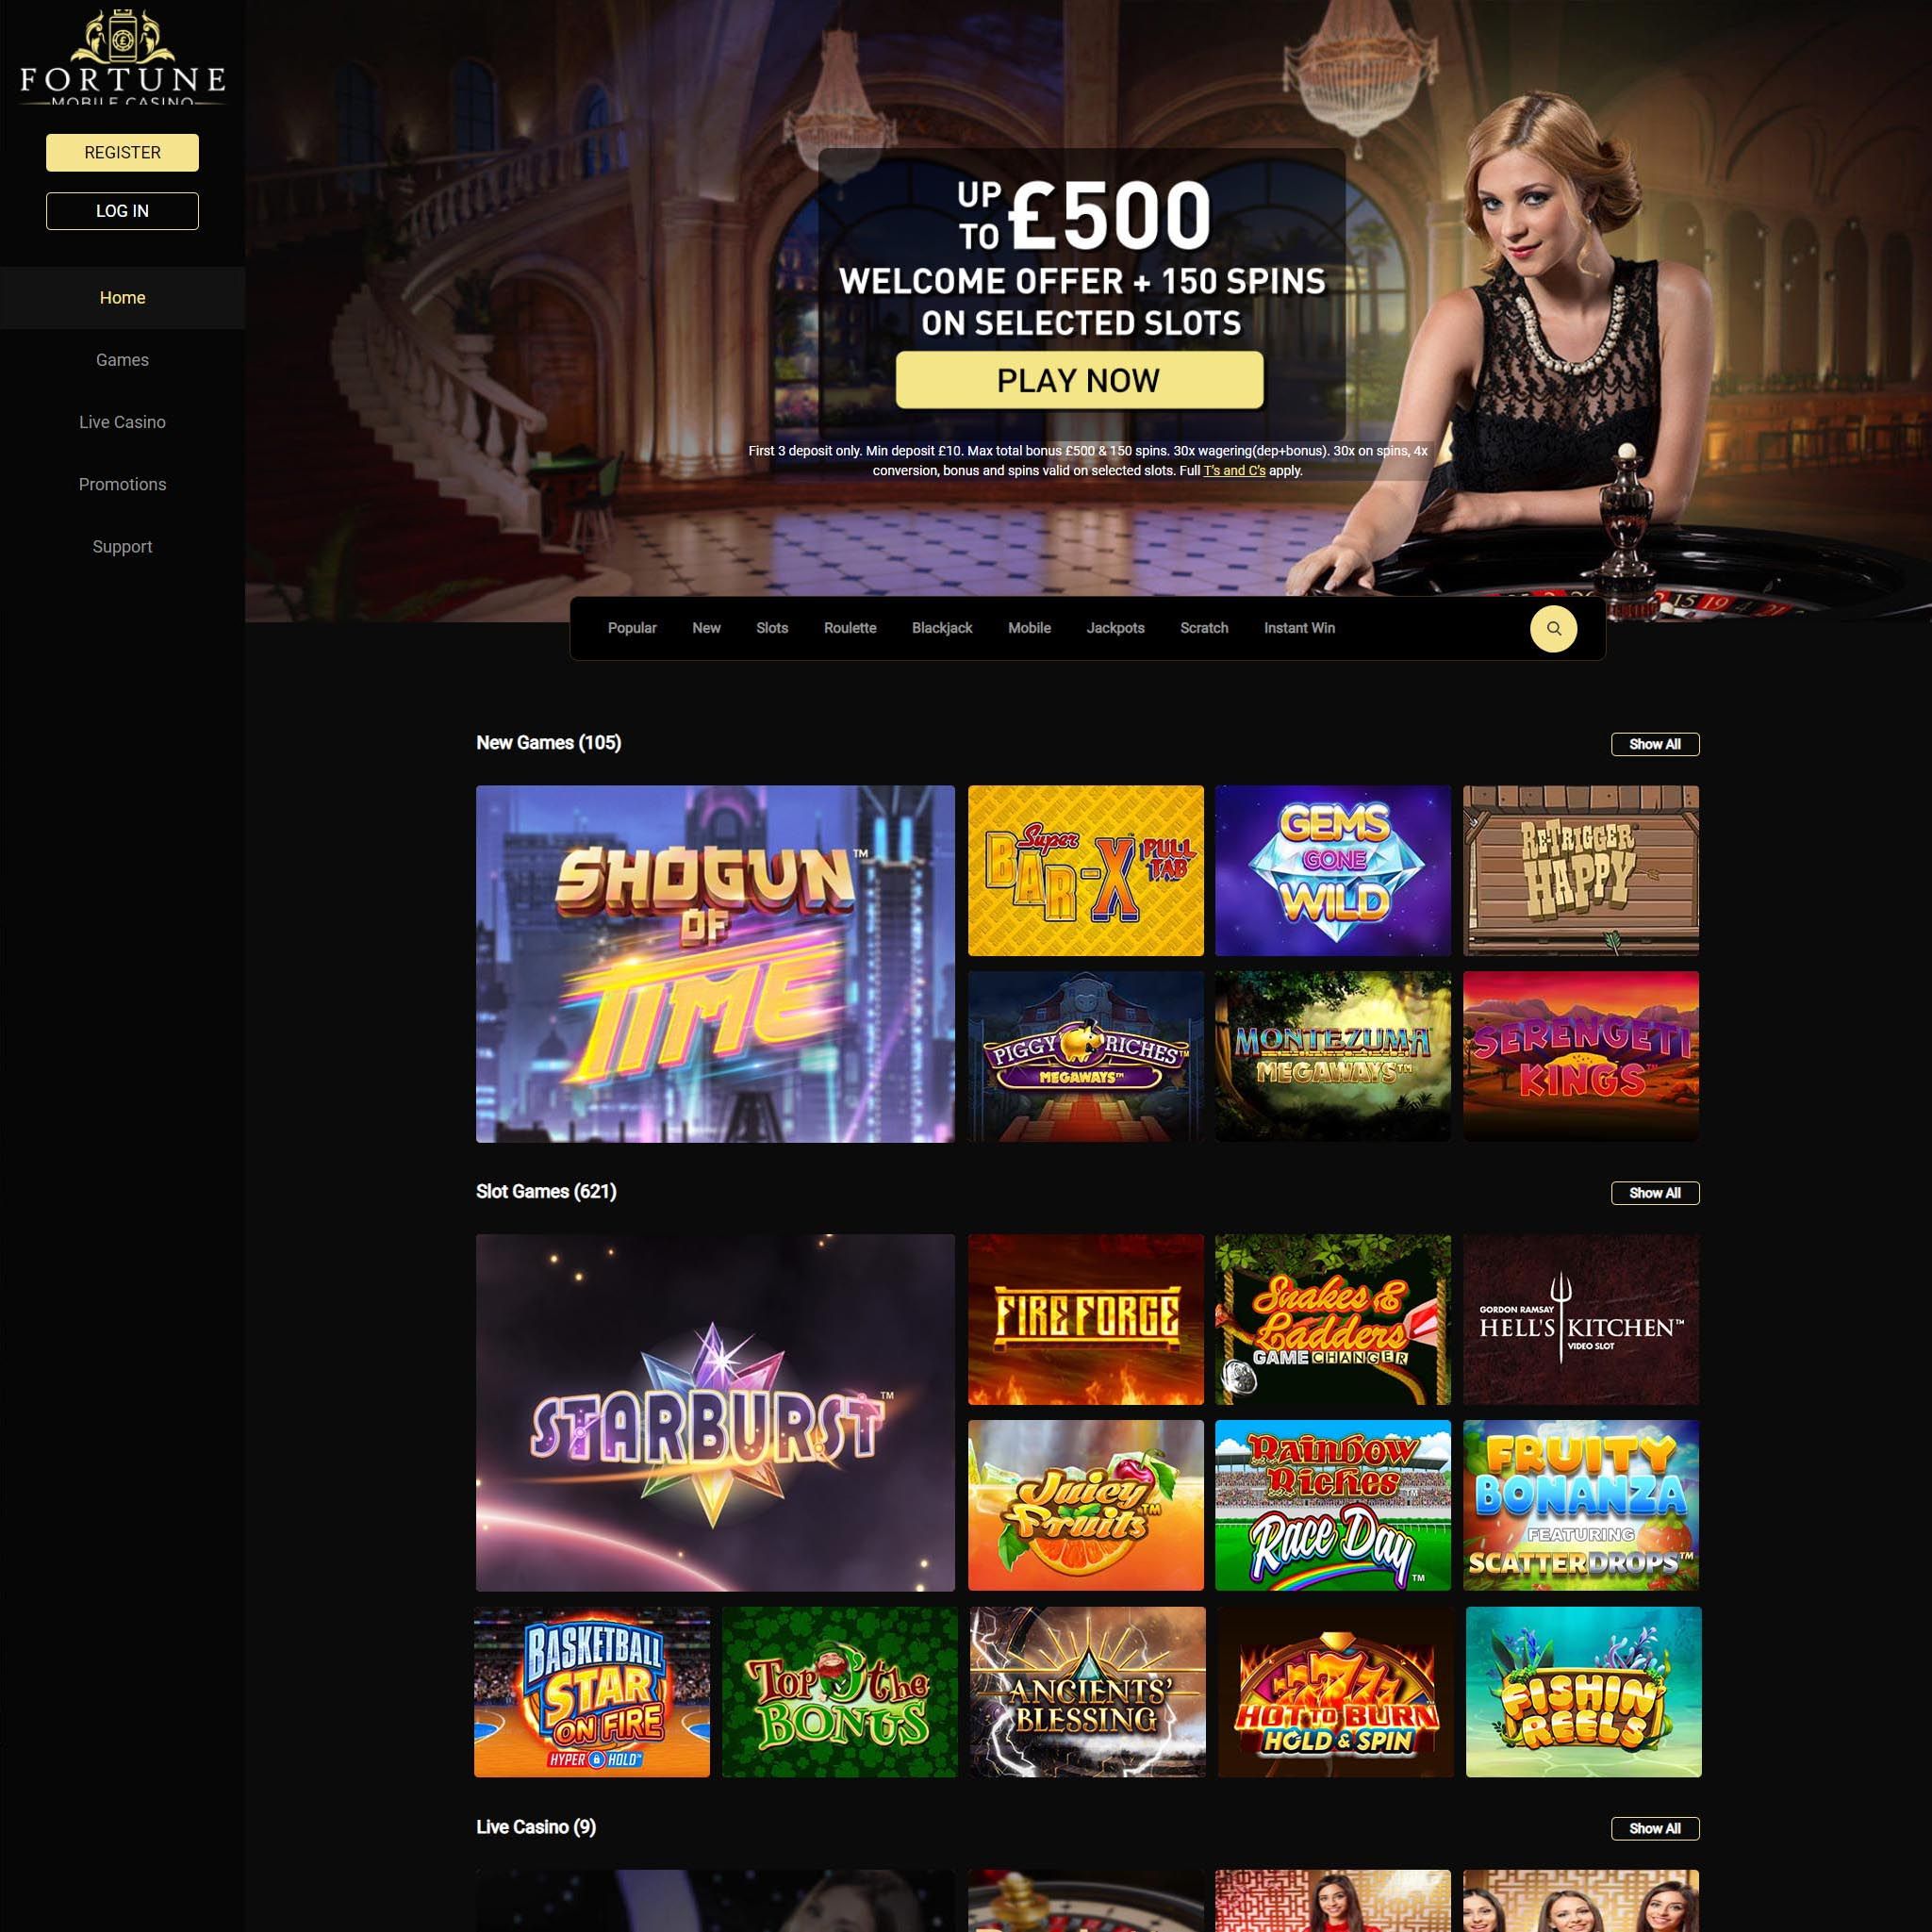 Fortune Mobile Casino UK review by Mr. Gamble